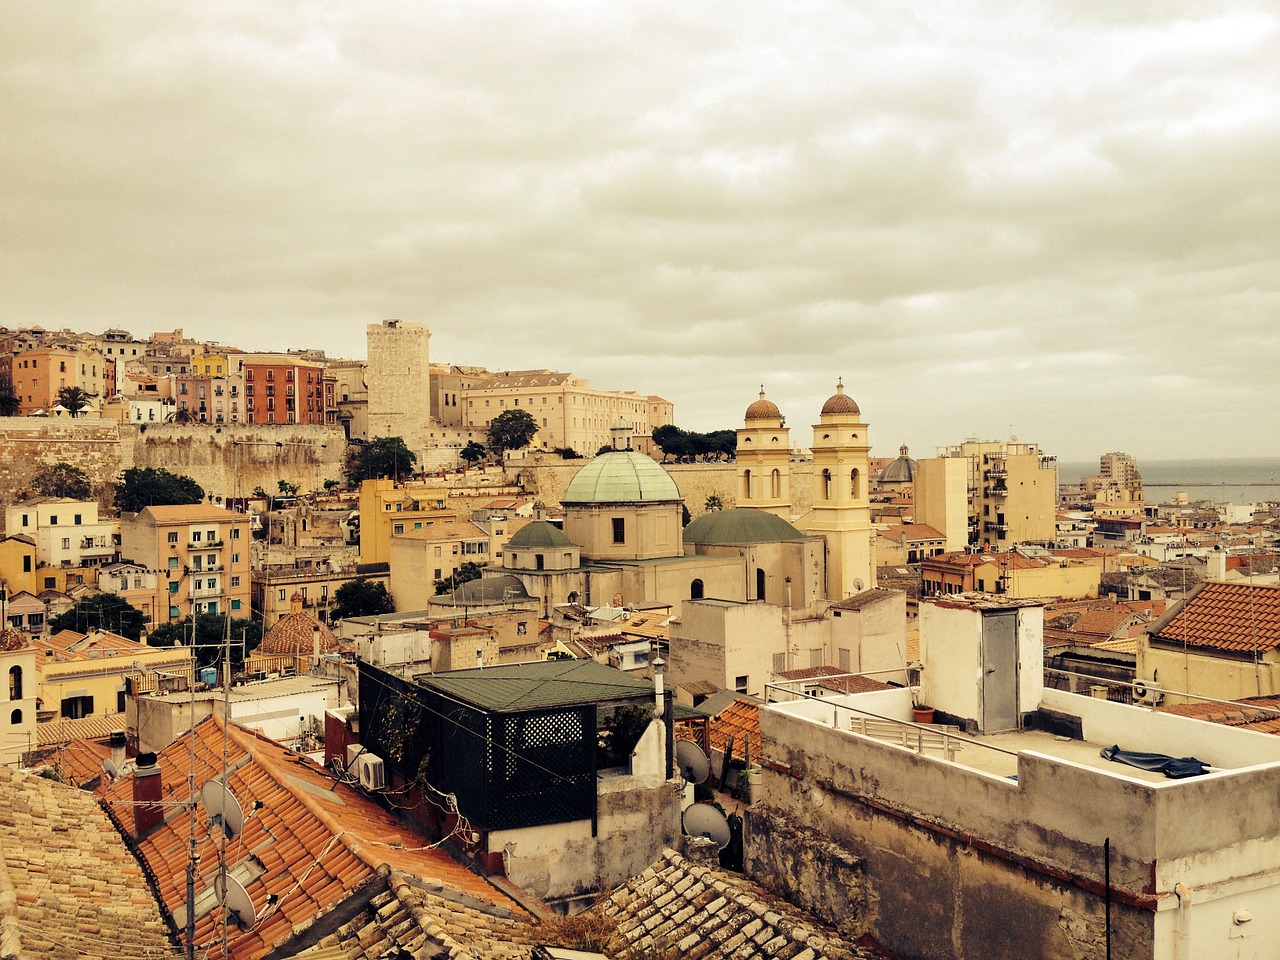 cagliari roofs old town free photo